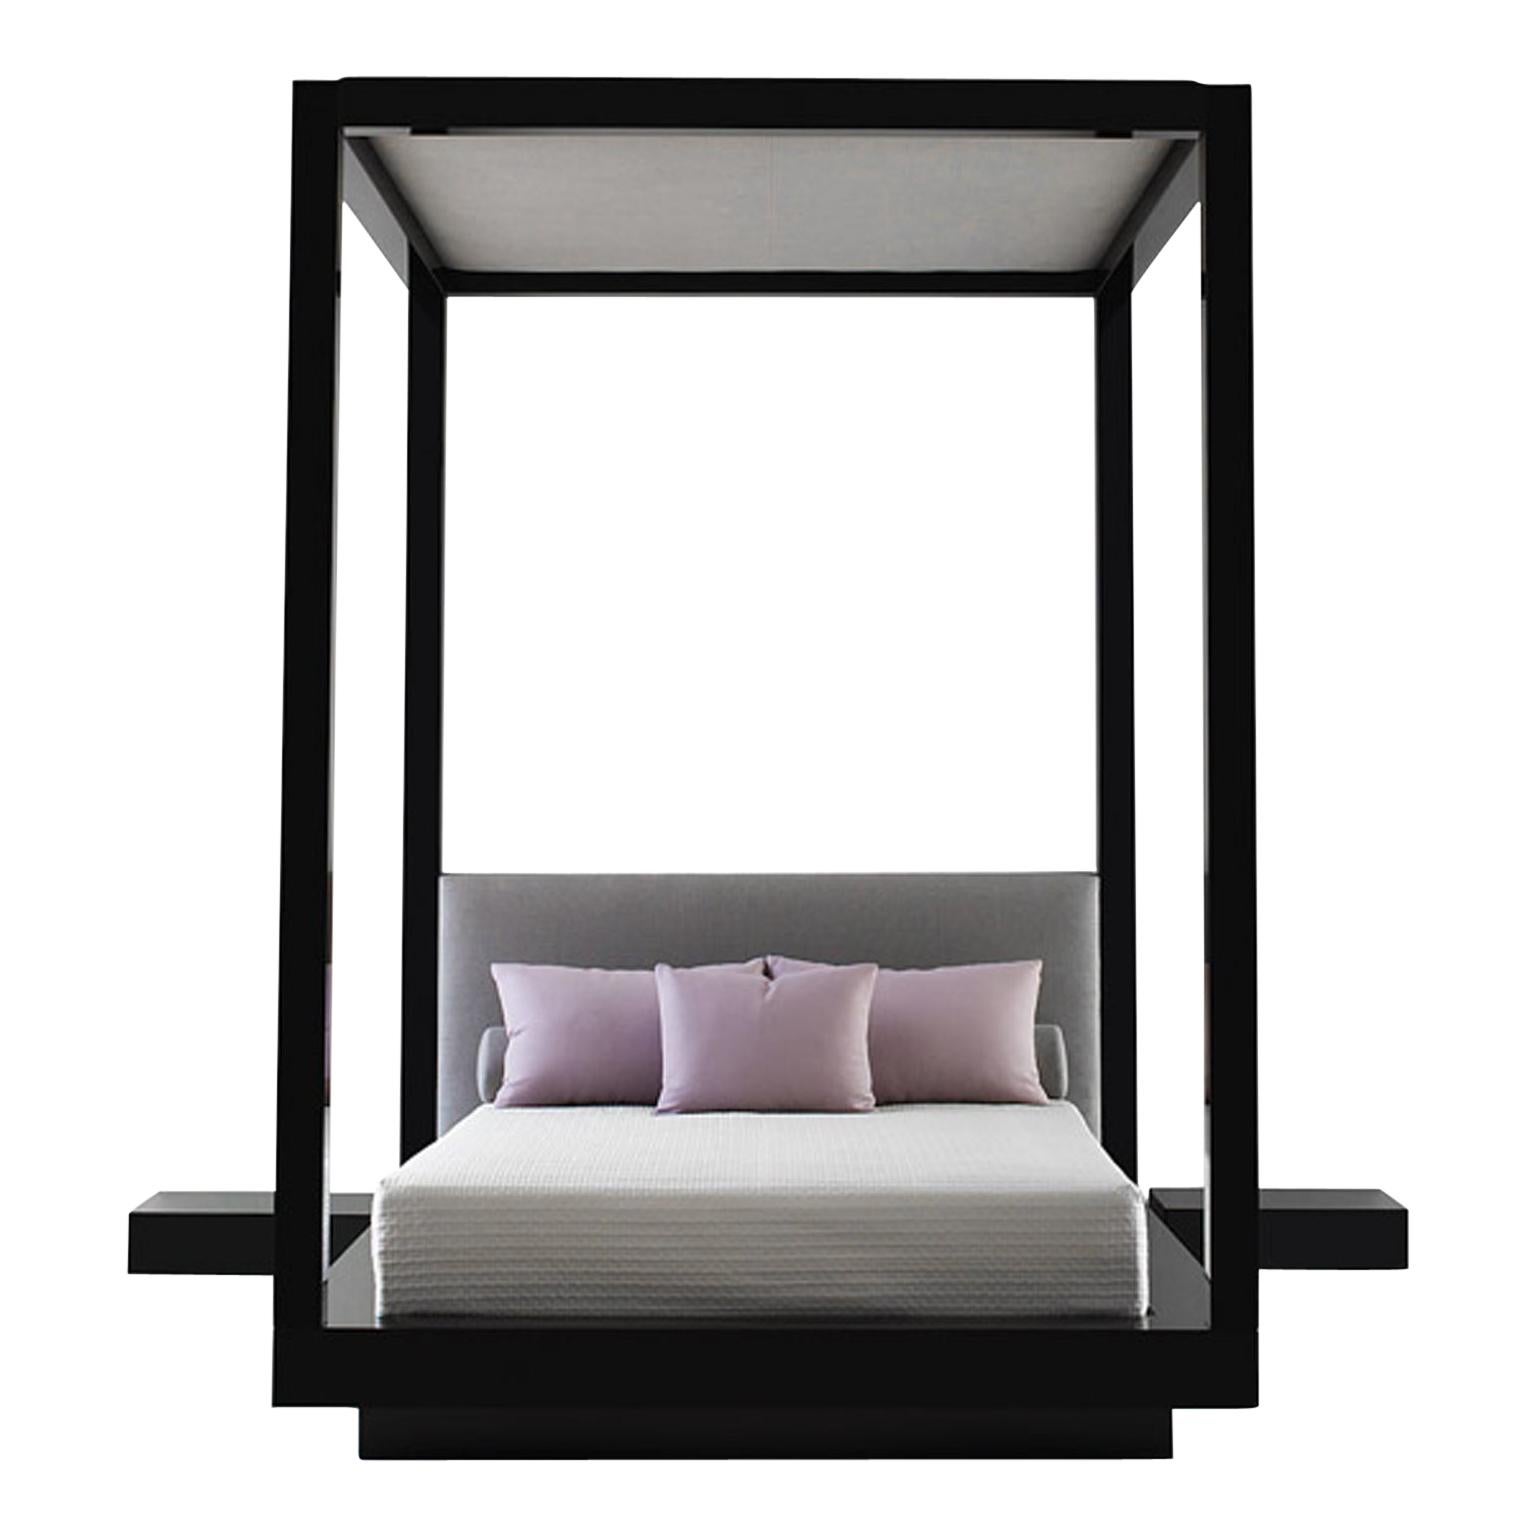 Plaza Bed King Queen, Black Lacquer Upholstered Canopy Headboard Four-Posts